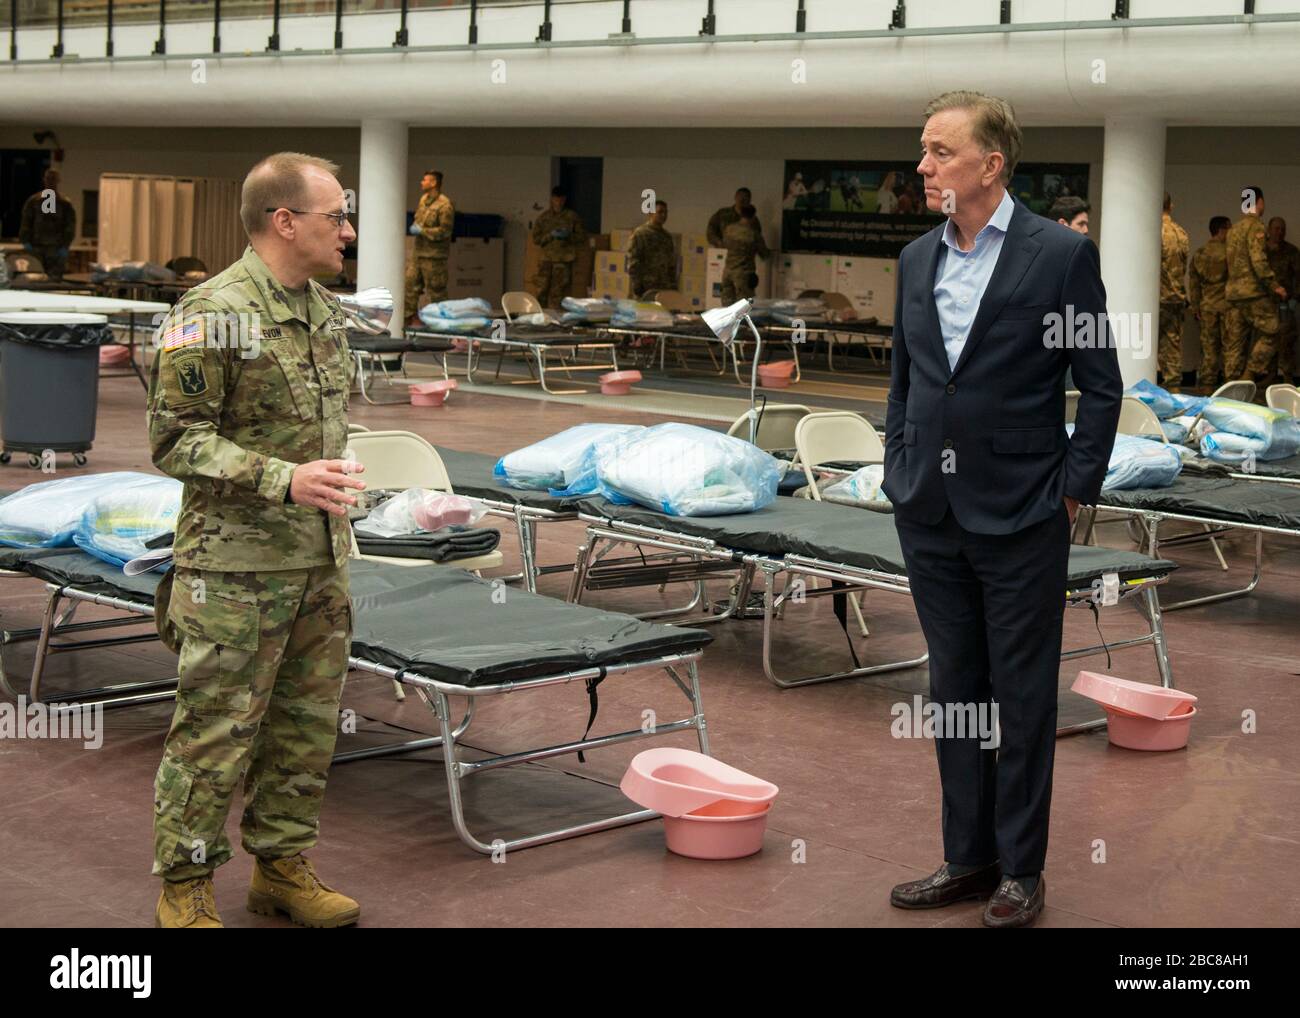 Maj. Gen. Francis Evon, The Adjutant General of the Connecticut National Guard, left, speaks with Connecticut Gov. Ned Lamont inside the Federal Medical Station in response to the COVID-19 pandemic at Moore Field House at Southern Connecticut State University April 1, 2020 in New Haven, Connecticut. Stock Photo